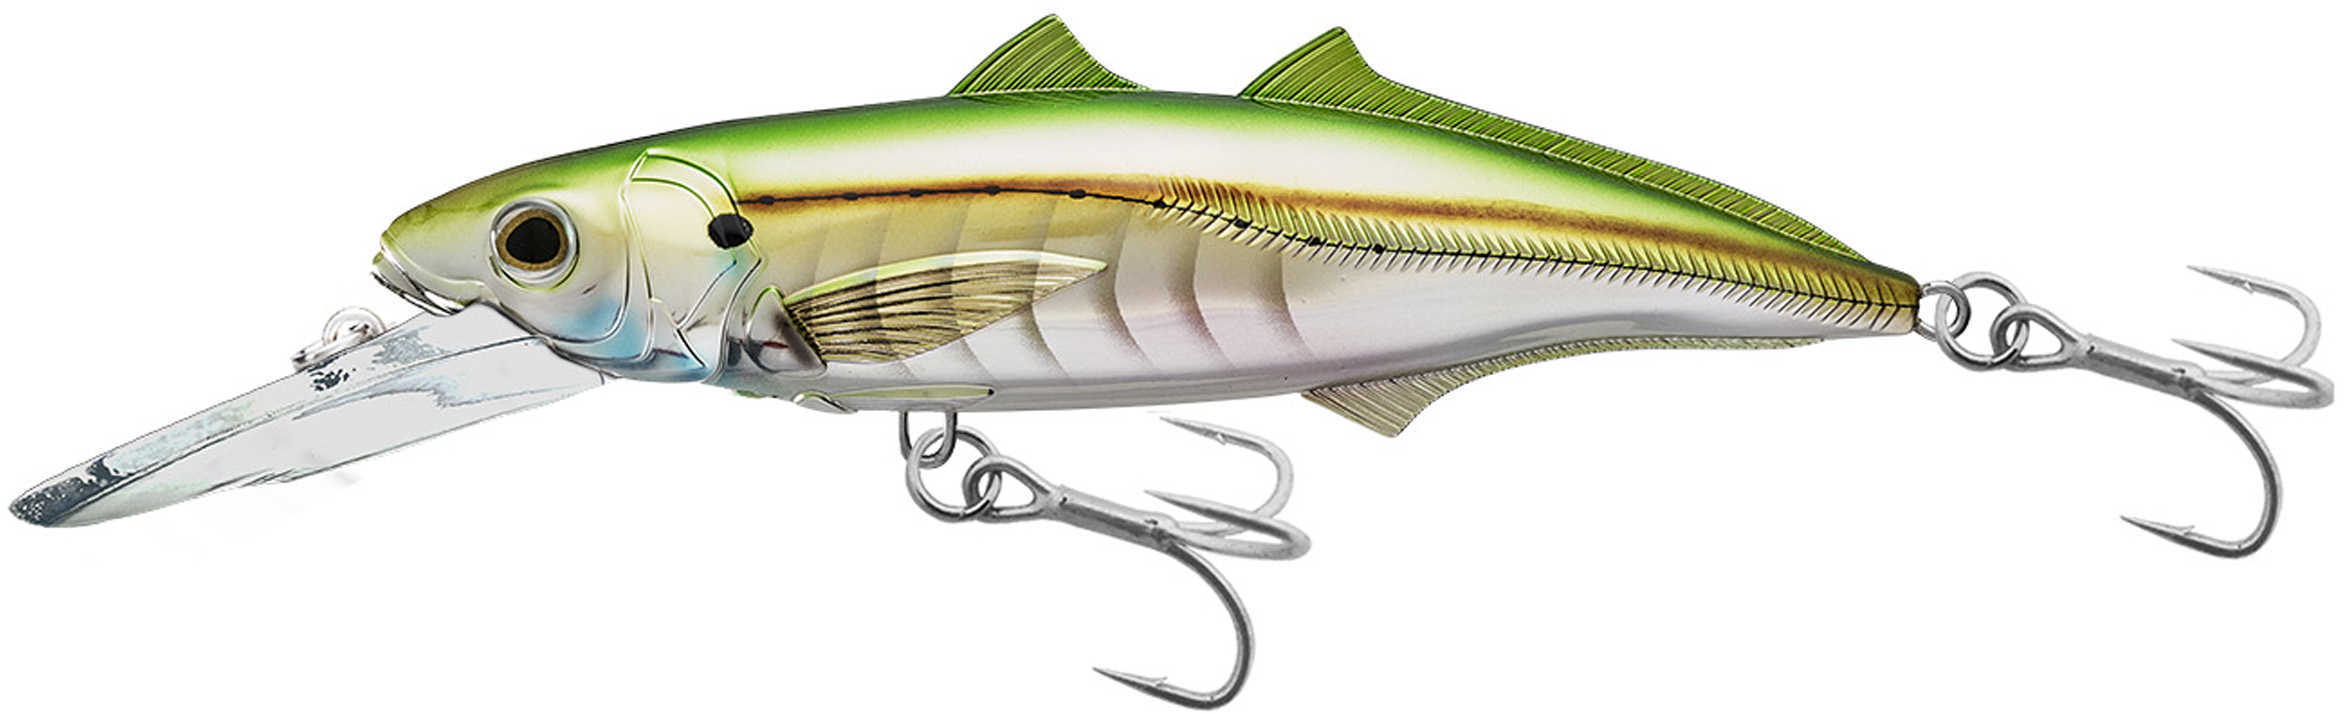 LIVETARGET Lures / Koppers Fishing and Tackle Corp Cigar Minow Jerkbait 6" Number 2/0 Hook Size 15-20 Depth Pearl/Green Md: CMJ15